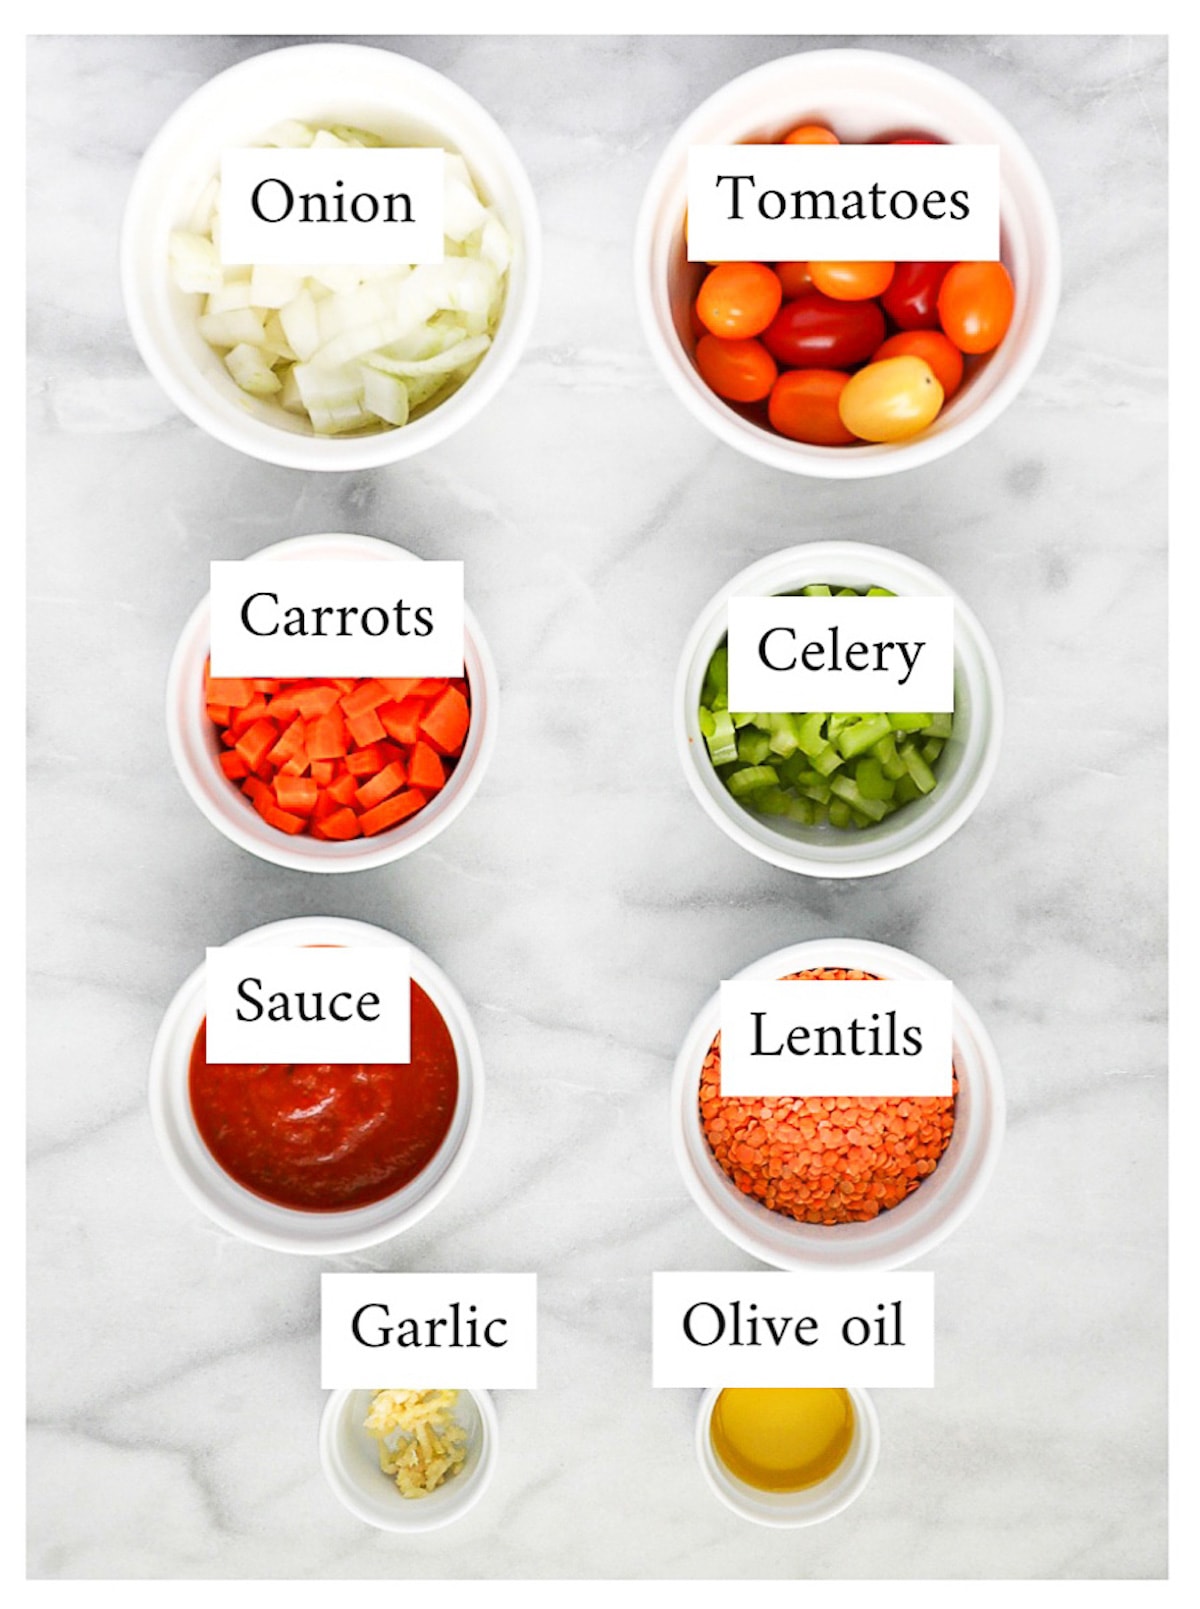 Labeled ingredients for bolognese including: onion, tomatoes, carrots, celery, sauce, lentils, garlic, and olive oil.